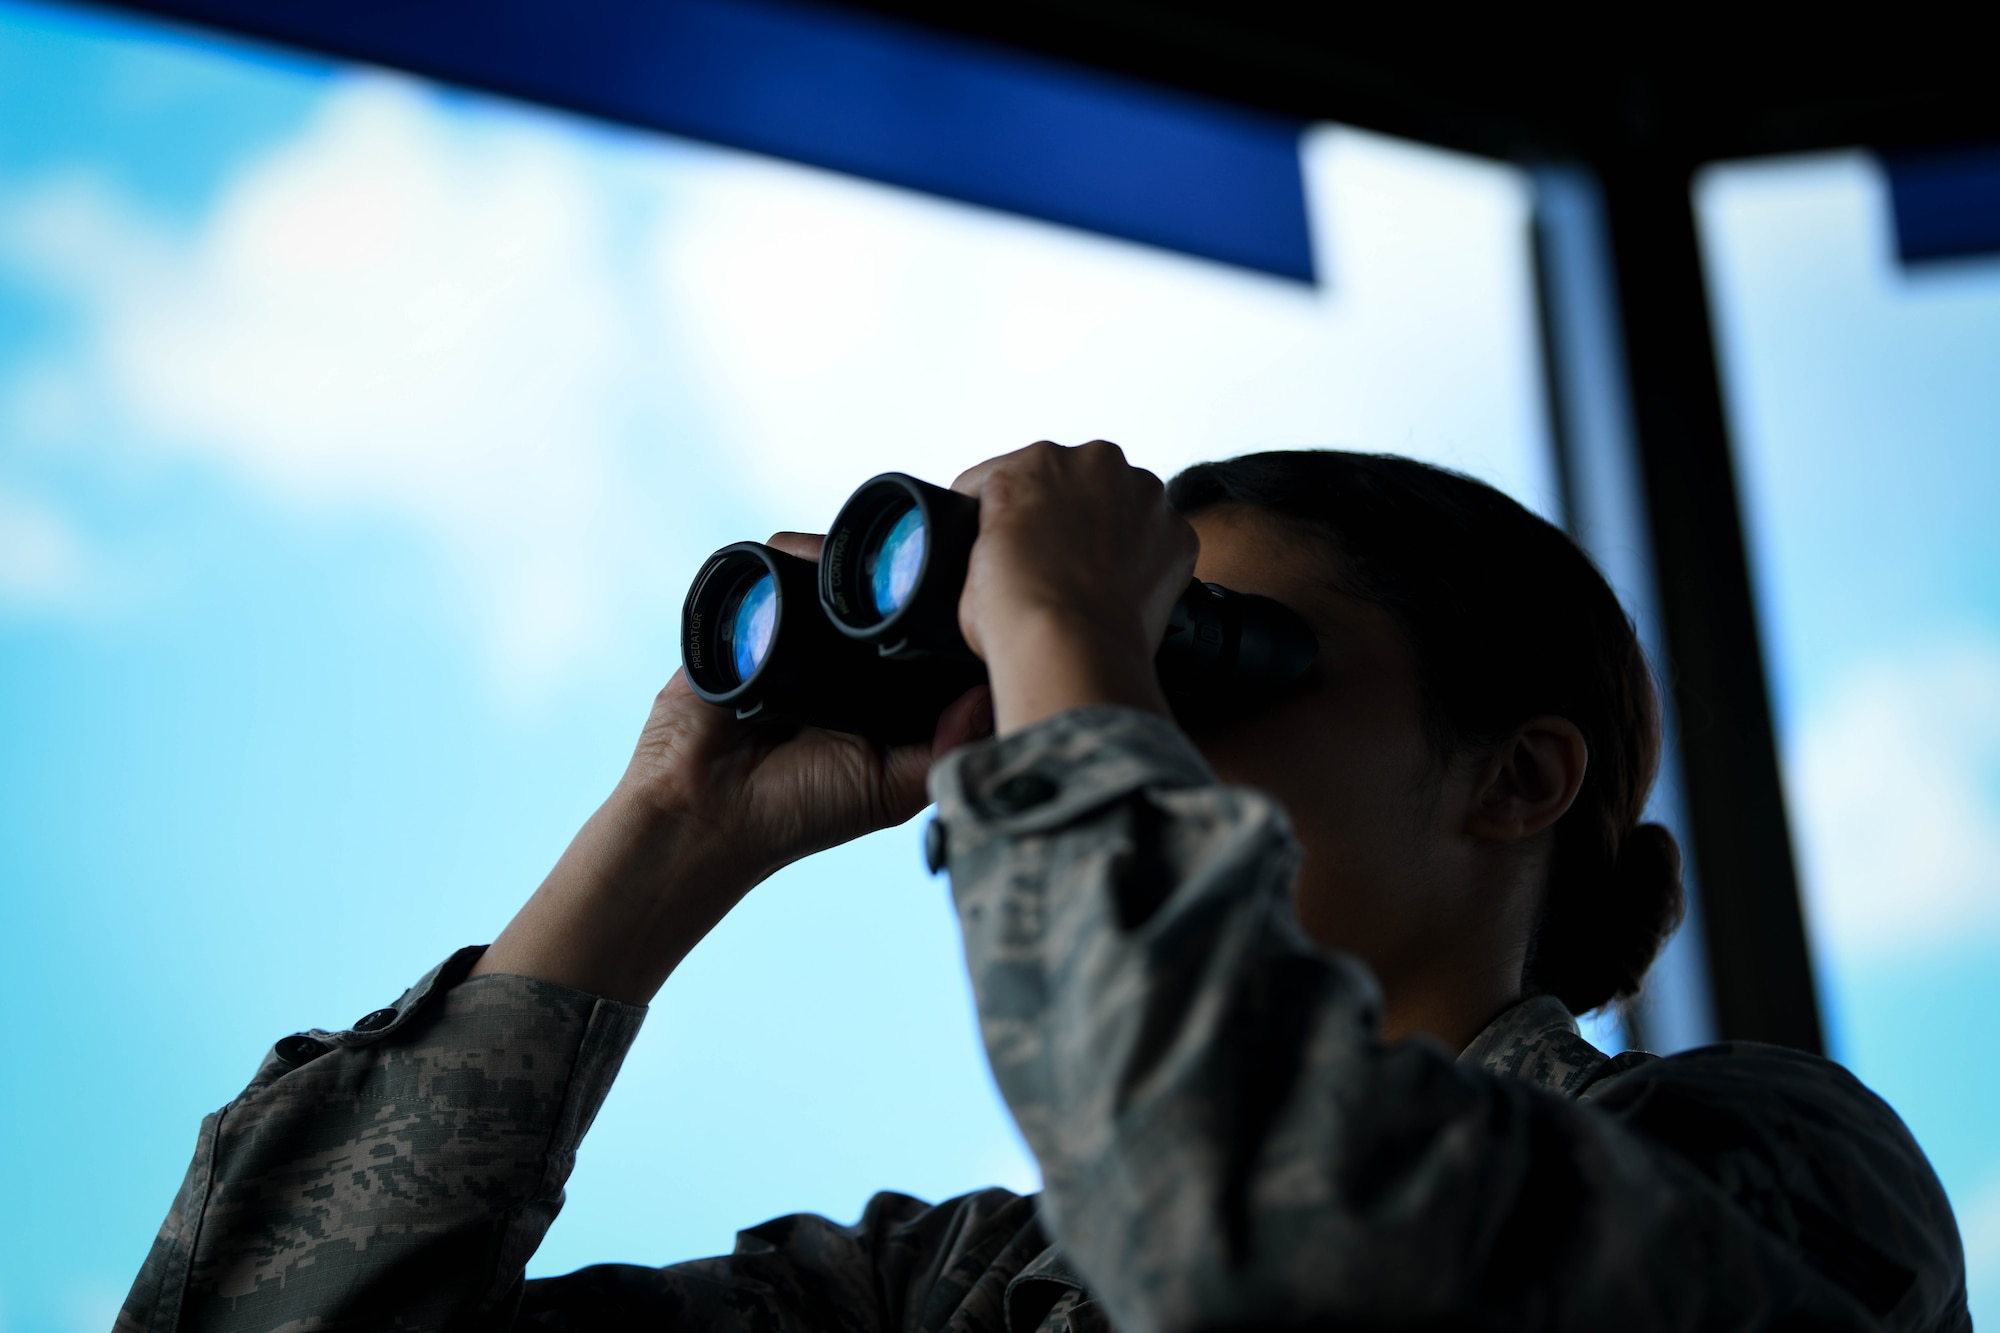 Senior Airman Bailey Hairston, 375th Operational Support Squadron air traffic controller, uses binoculars to look for birds or other hazards that can damage aircraft